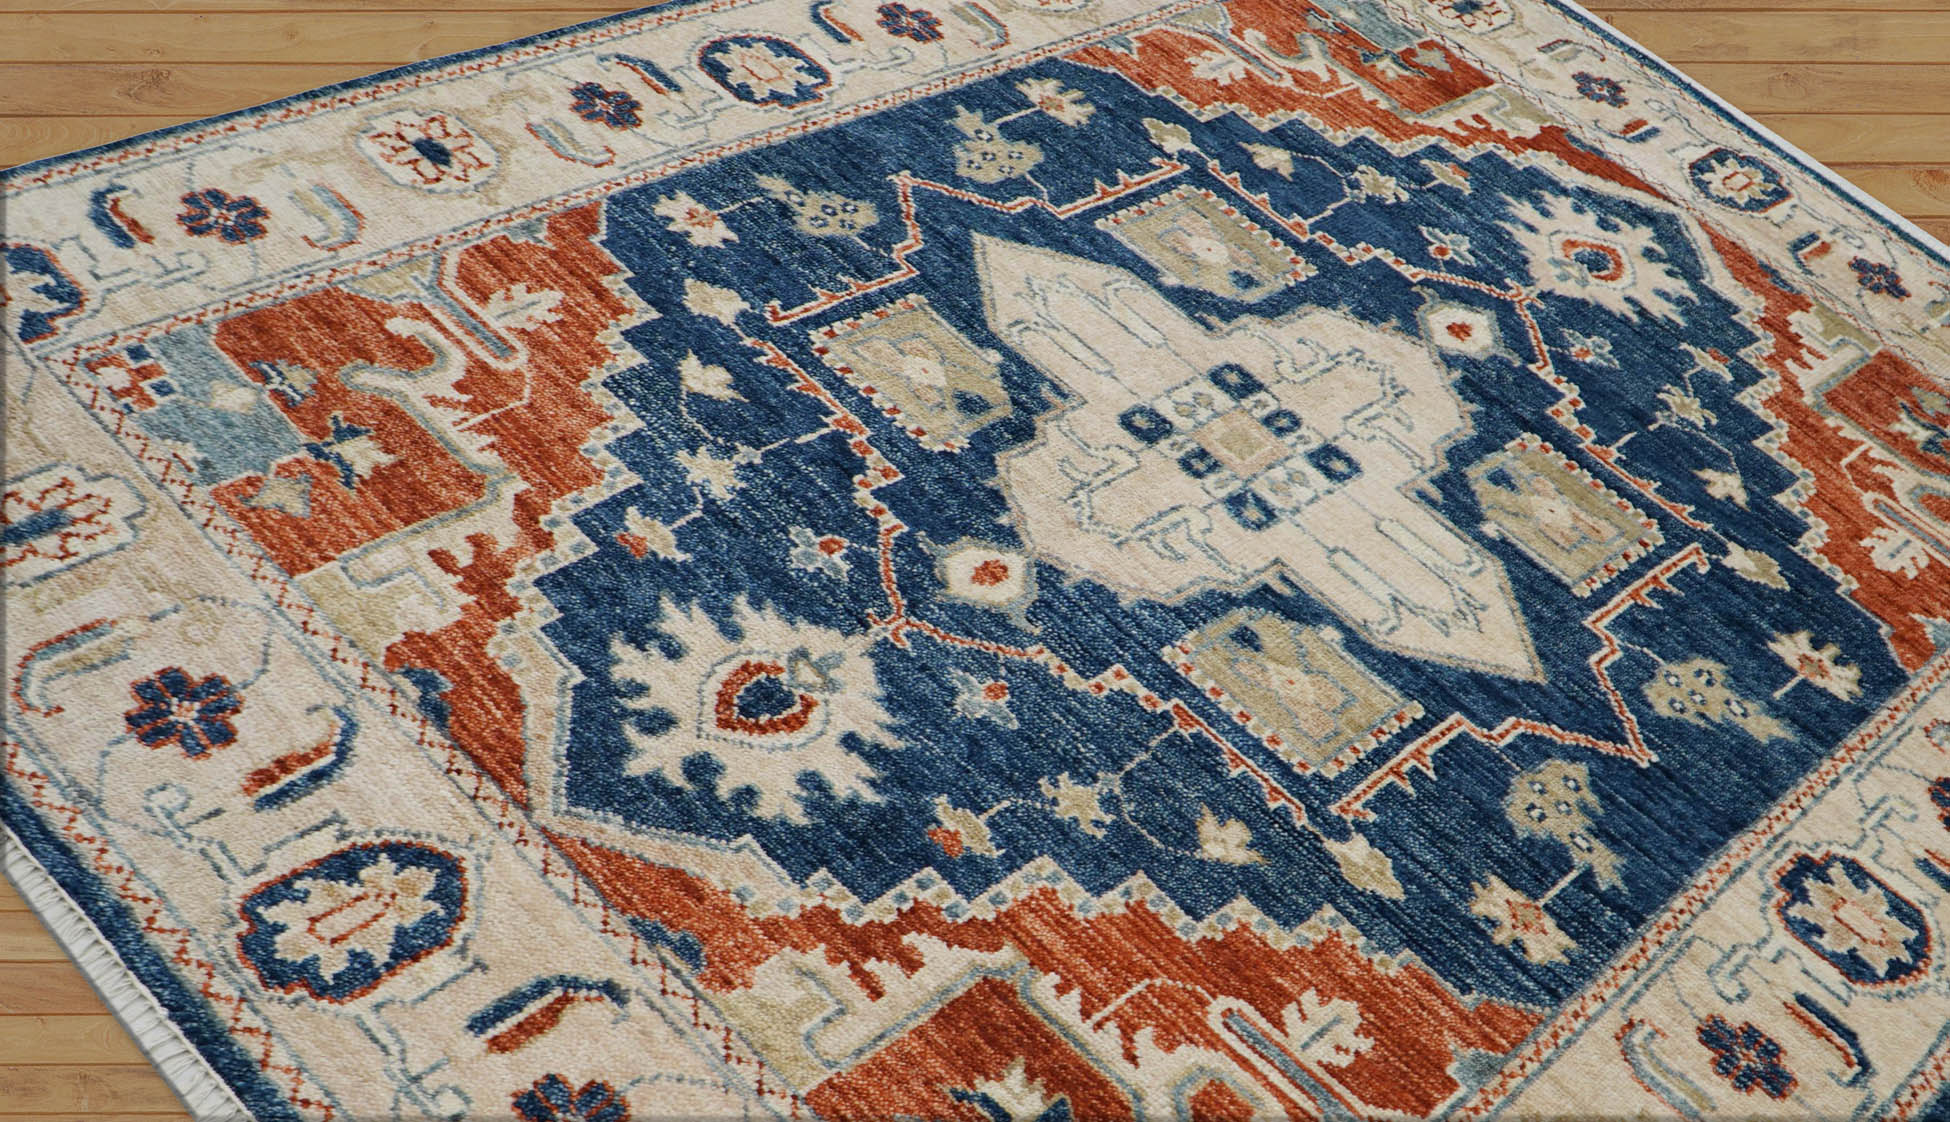 Fagerlund 8x10 Hand Knotted Turkish Oushak  100% Wool Transitional Oriental Area Rug Navy, Burnt Orange Color